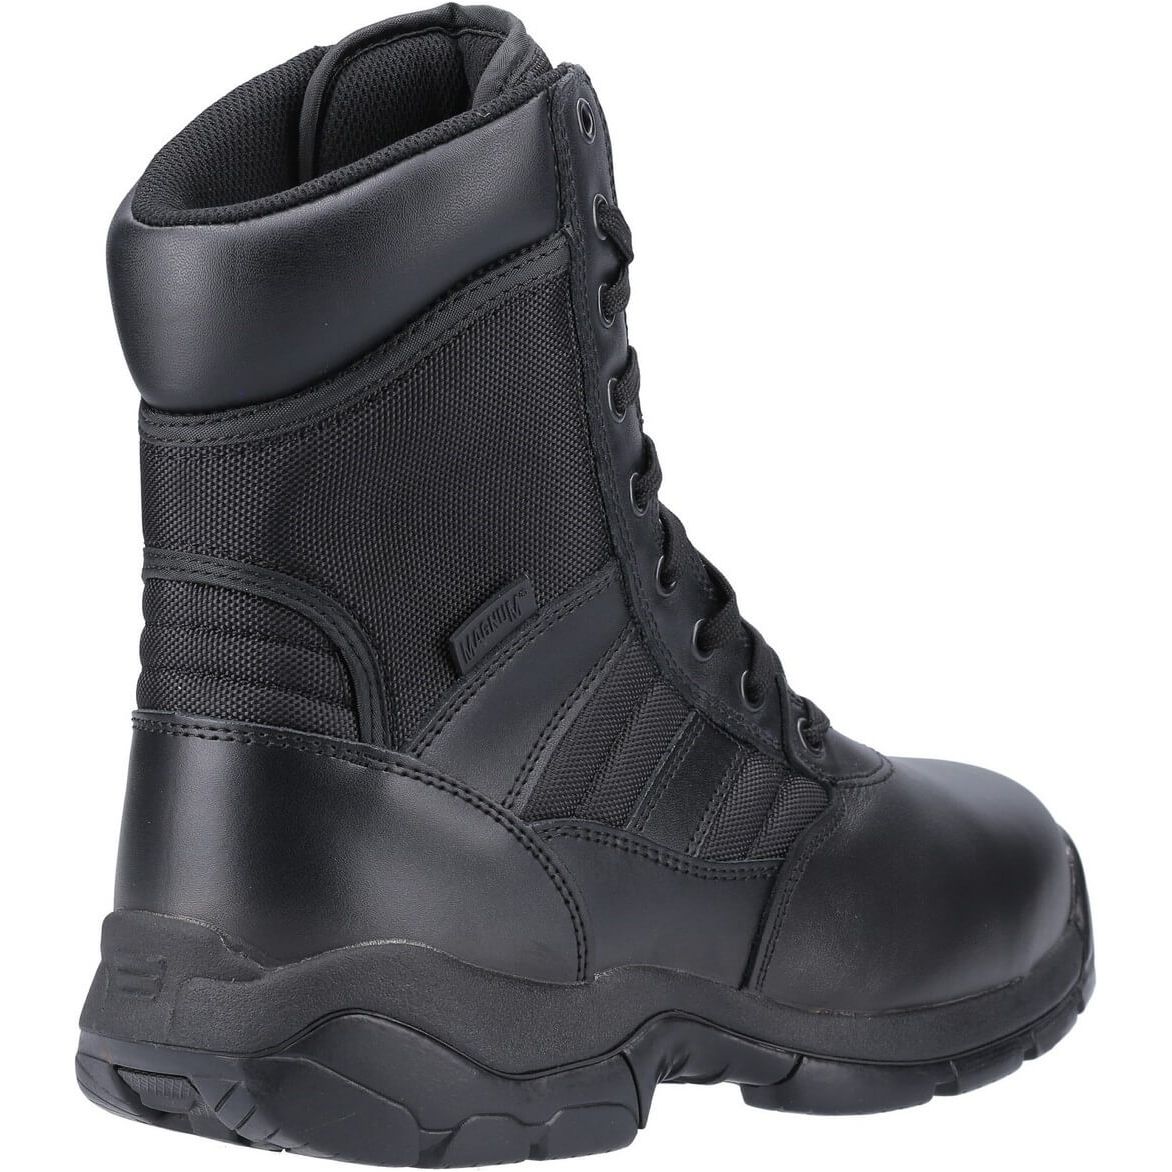 Magnum Panther 8.0 Steel Toe Safety Boots-Black-2